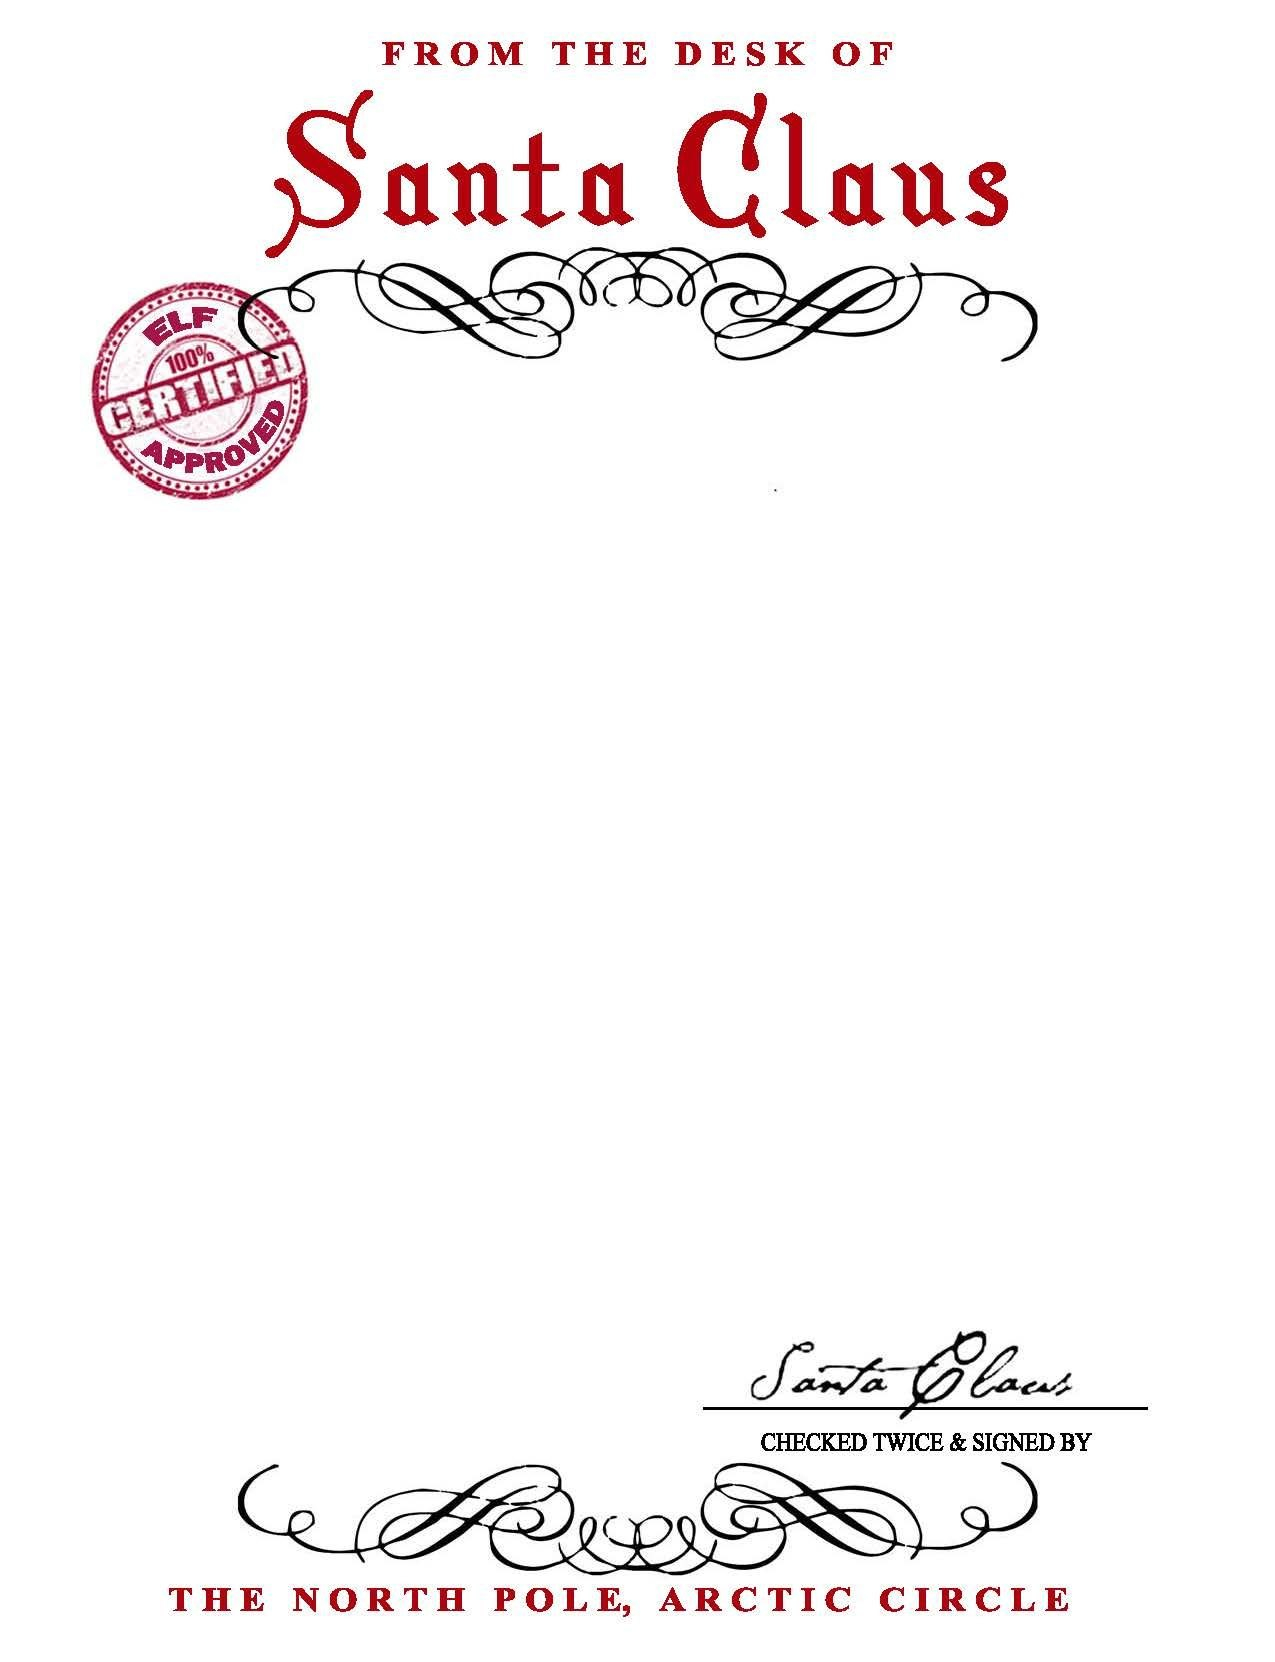 Santa Claus Letterhead Will Bring Lots Of Joy To Children inside Free Printable Letter From Santa Template